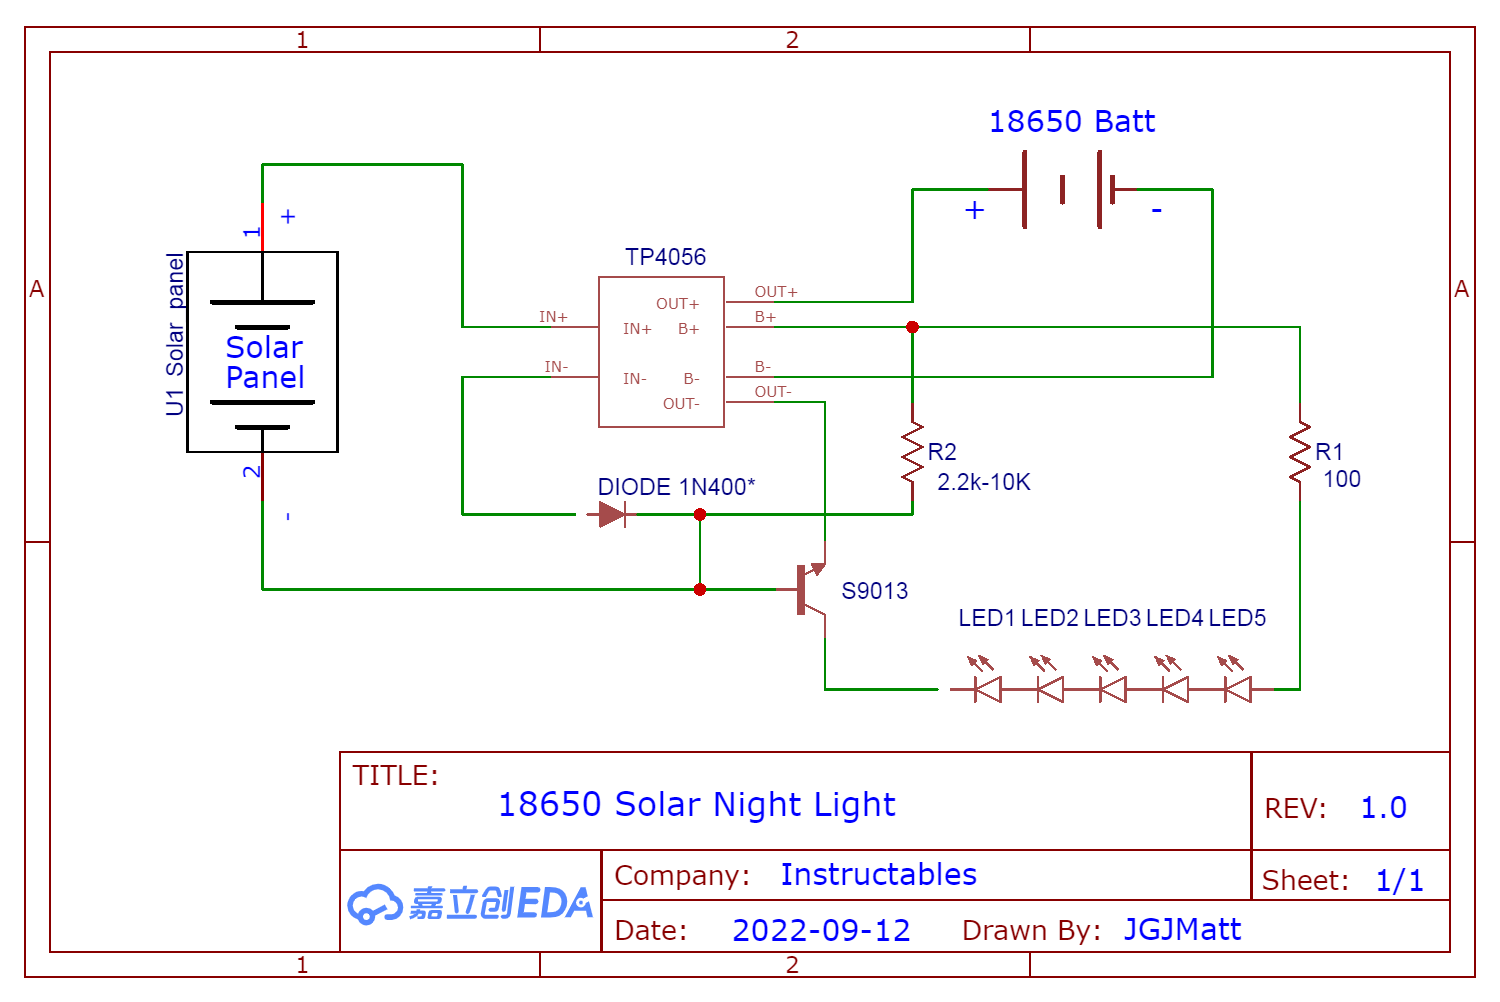 Schematic_Instructables_2022-09-12.png